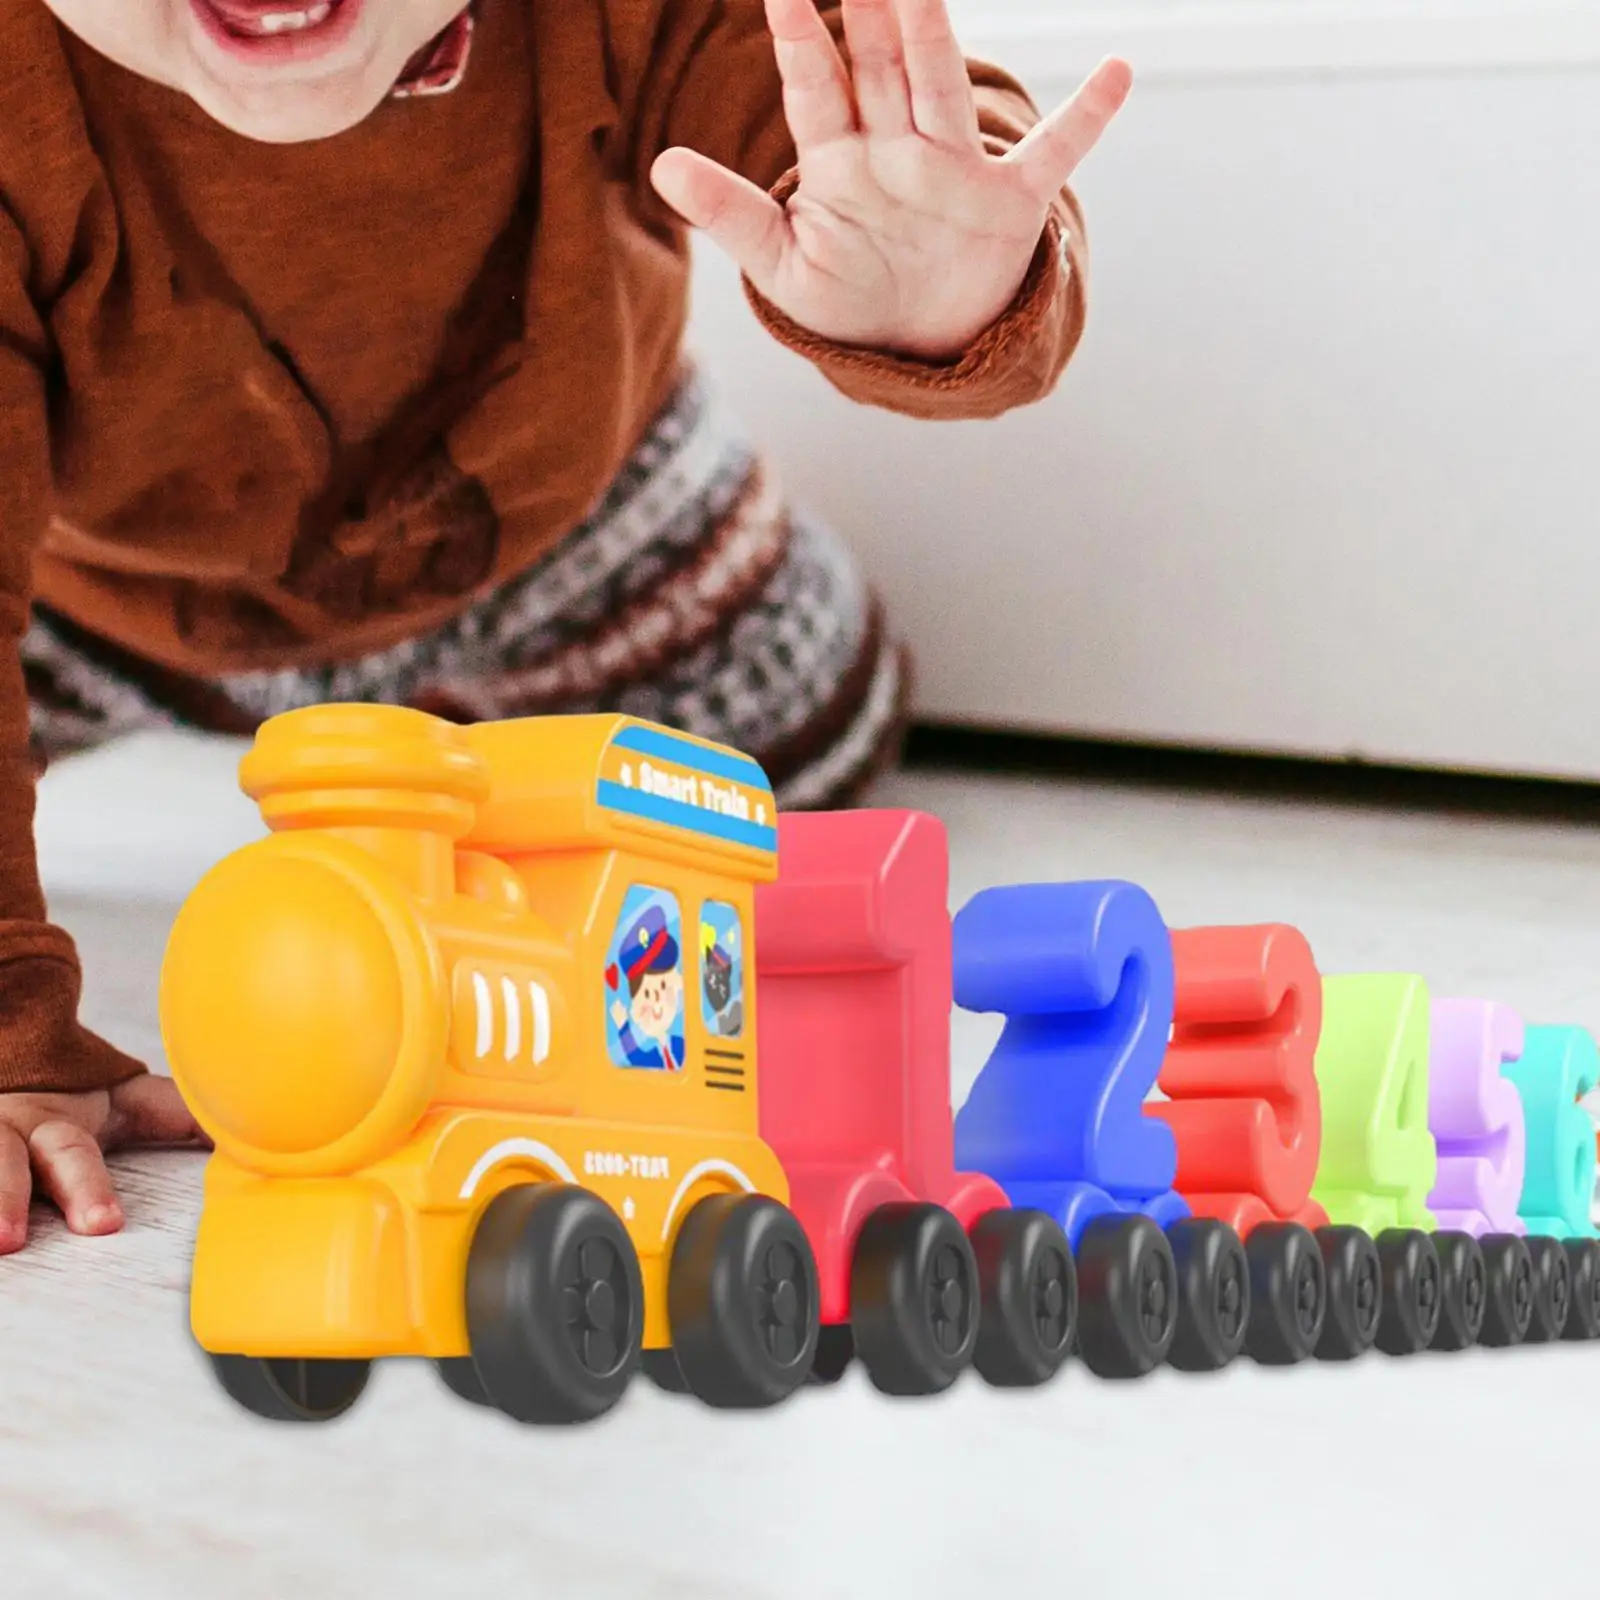 11 Piece Wooden Train Set Durable Colorful Wooden Number Train Set for Game Outdoor